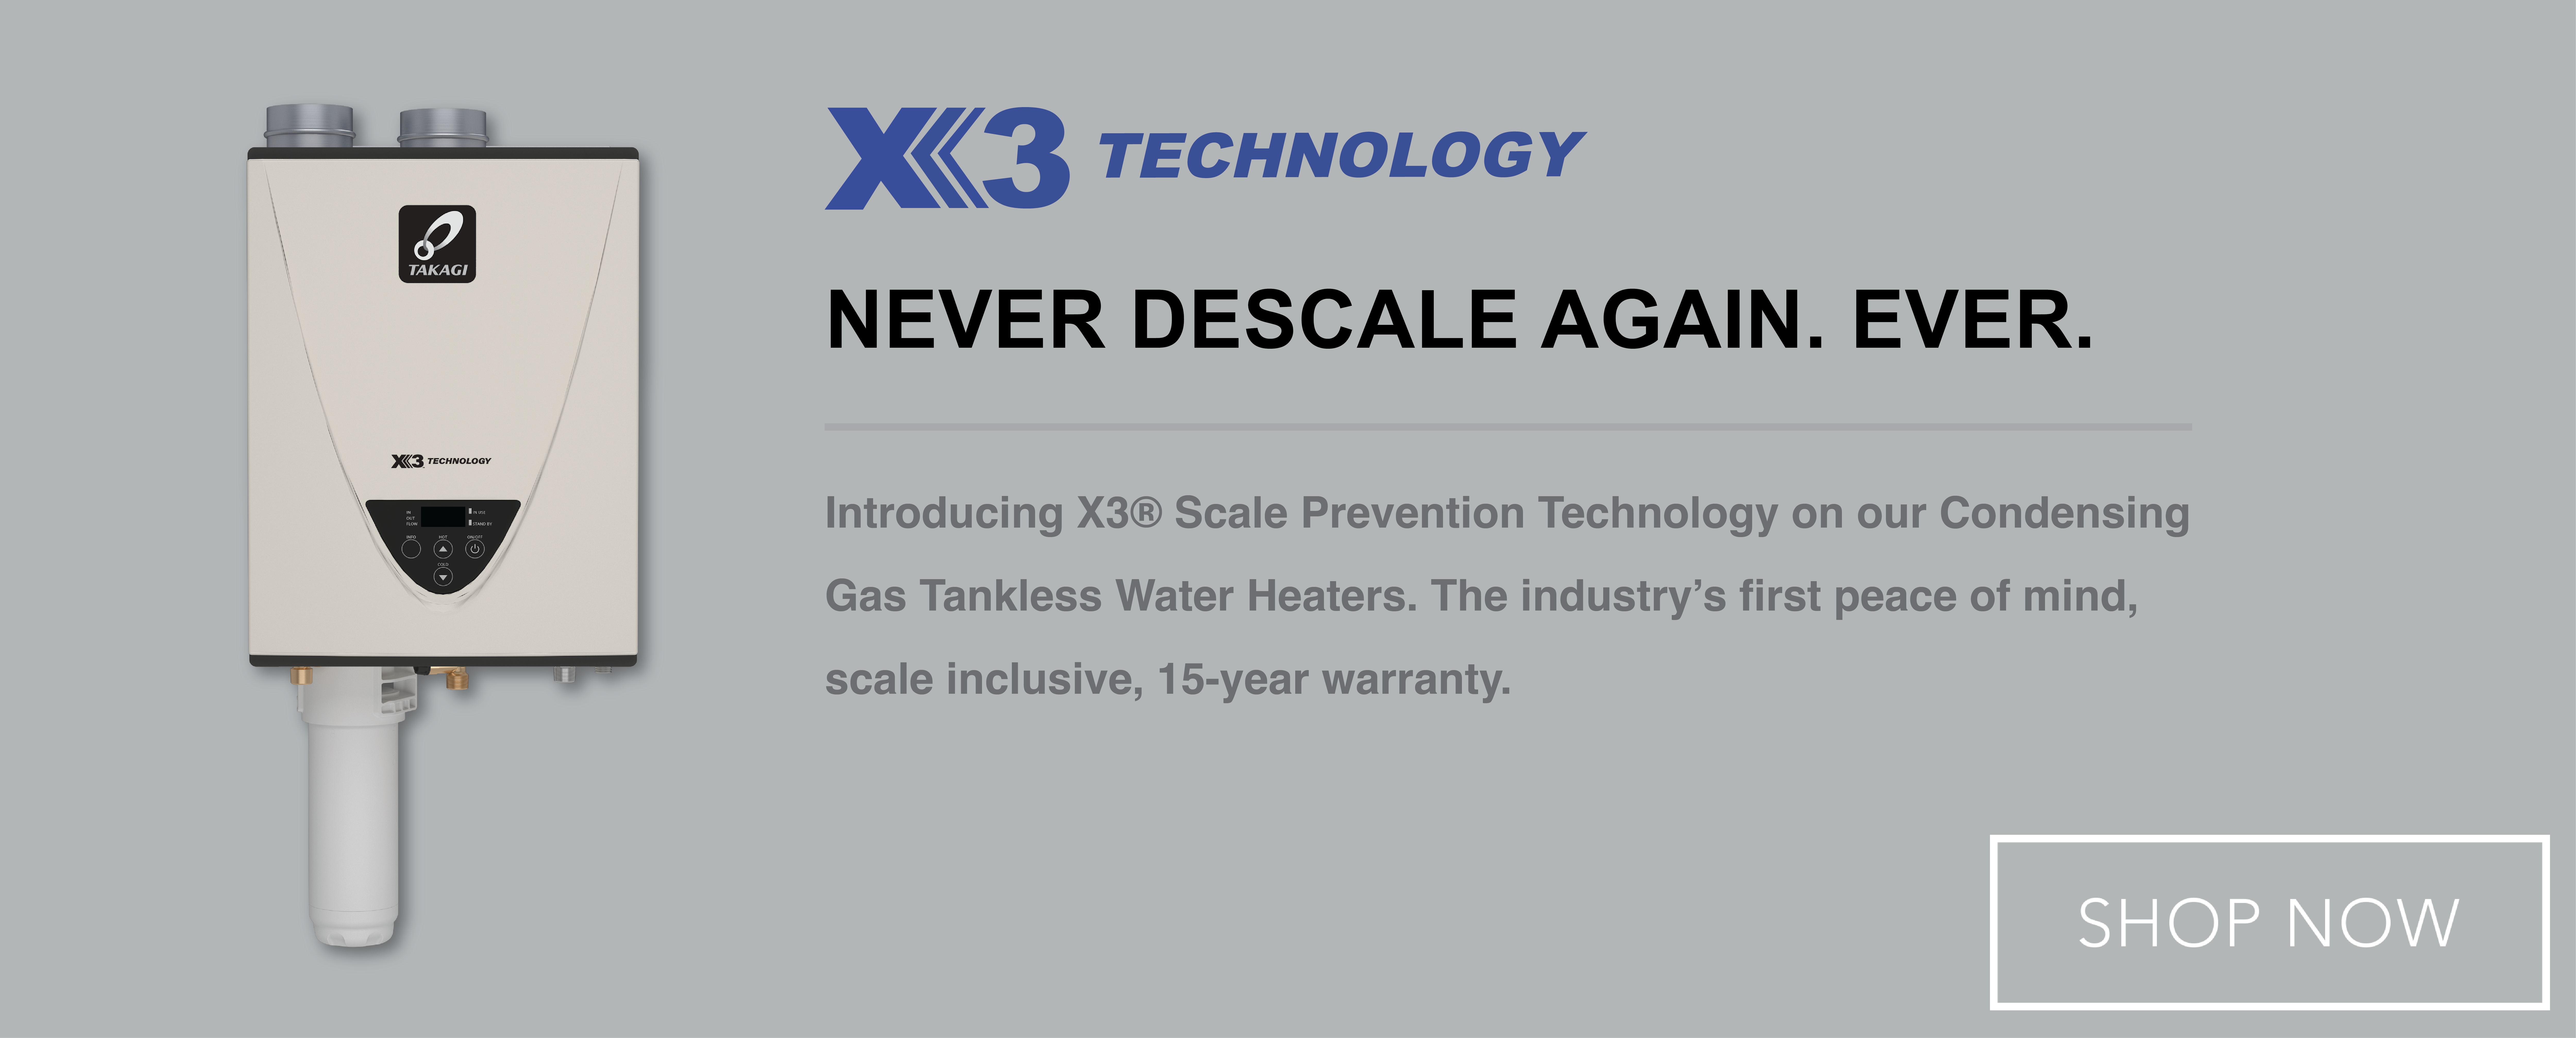  X3 Scale Prevention Technology from Takagi